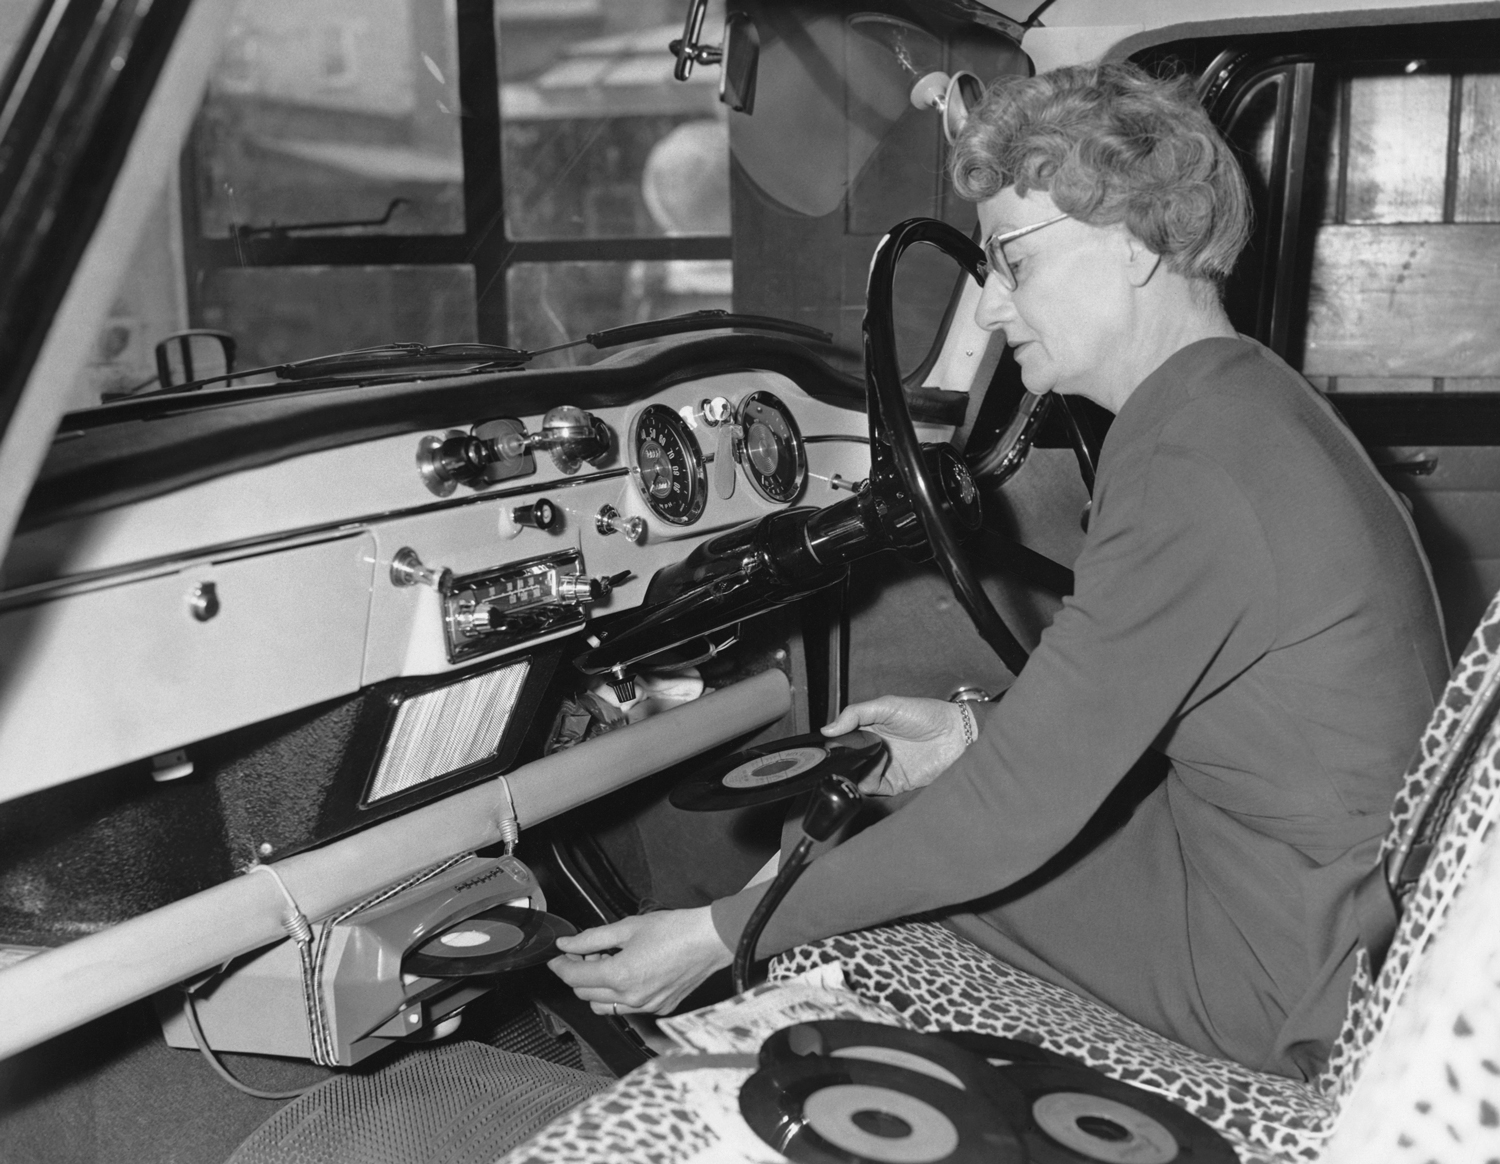 A woman sits at the steering wheel on an old car and puts a 45 record into a below-dashboard record player.